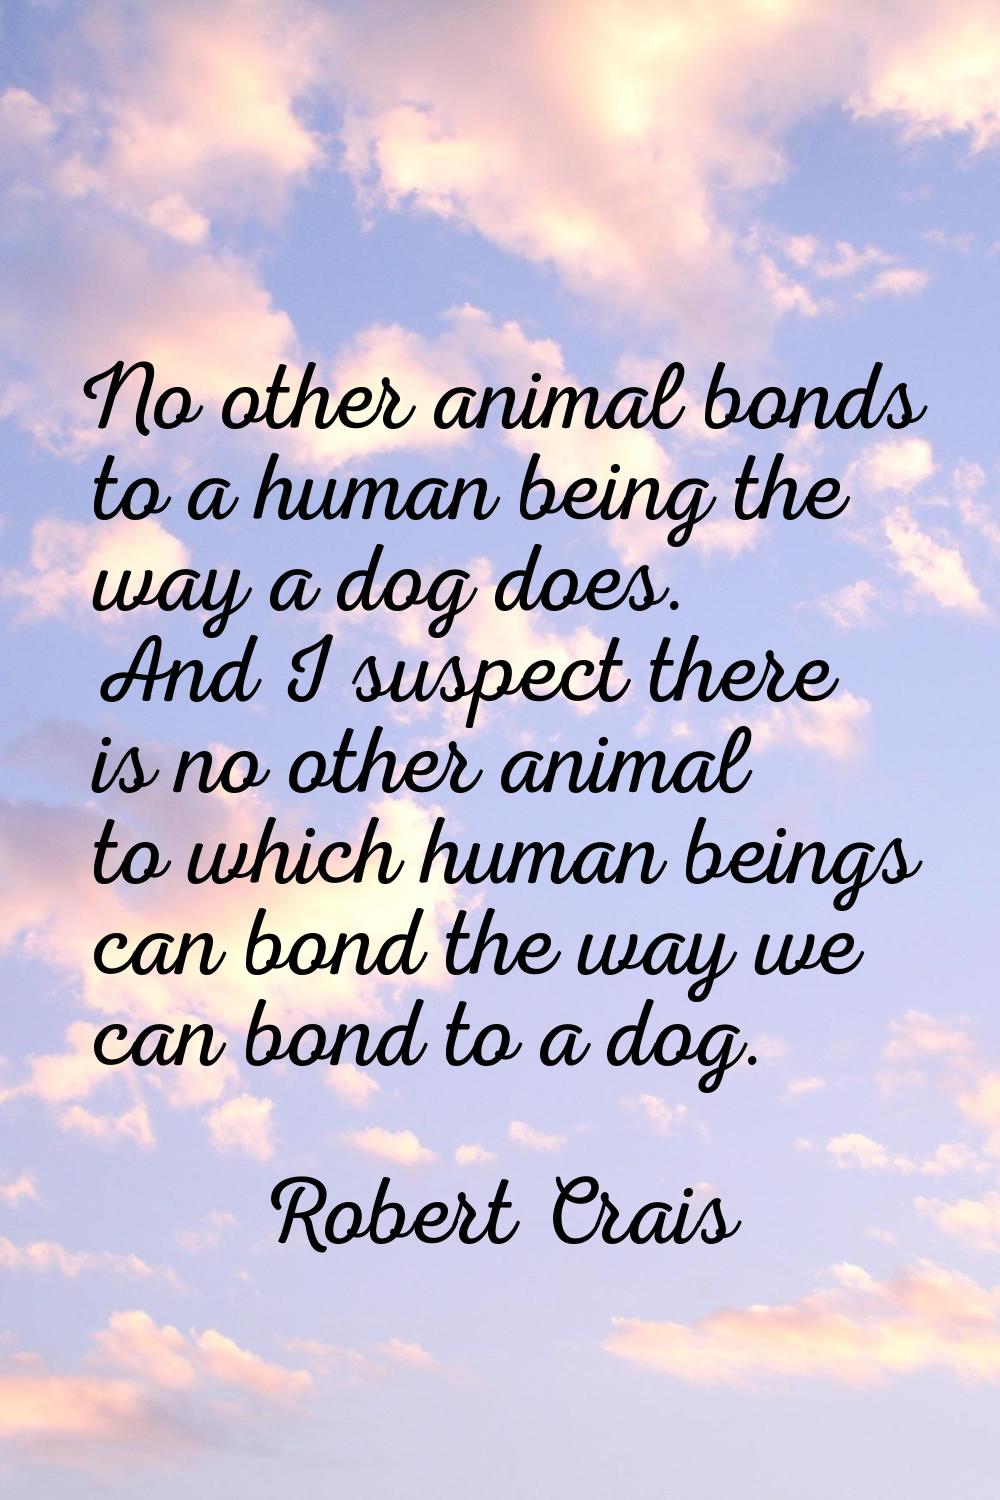 No other animal bonds to a human being the way a dog does. And I suspect there is no other animal t